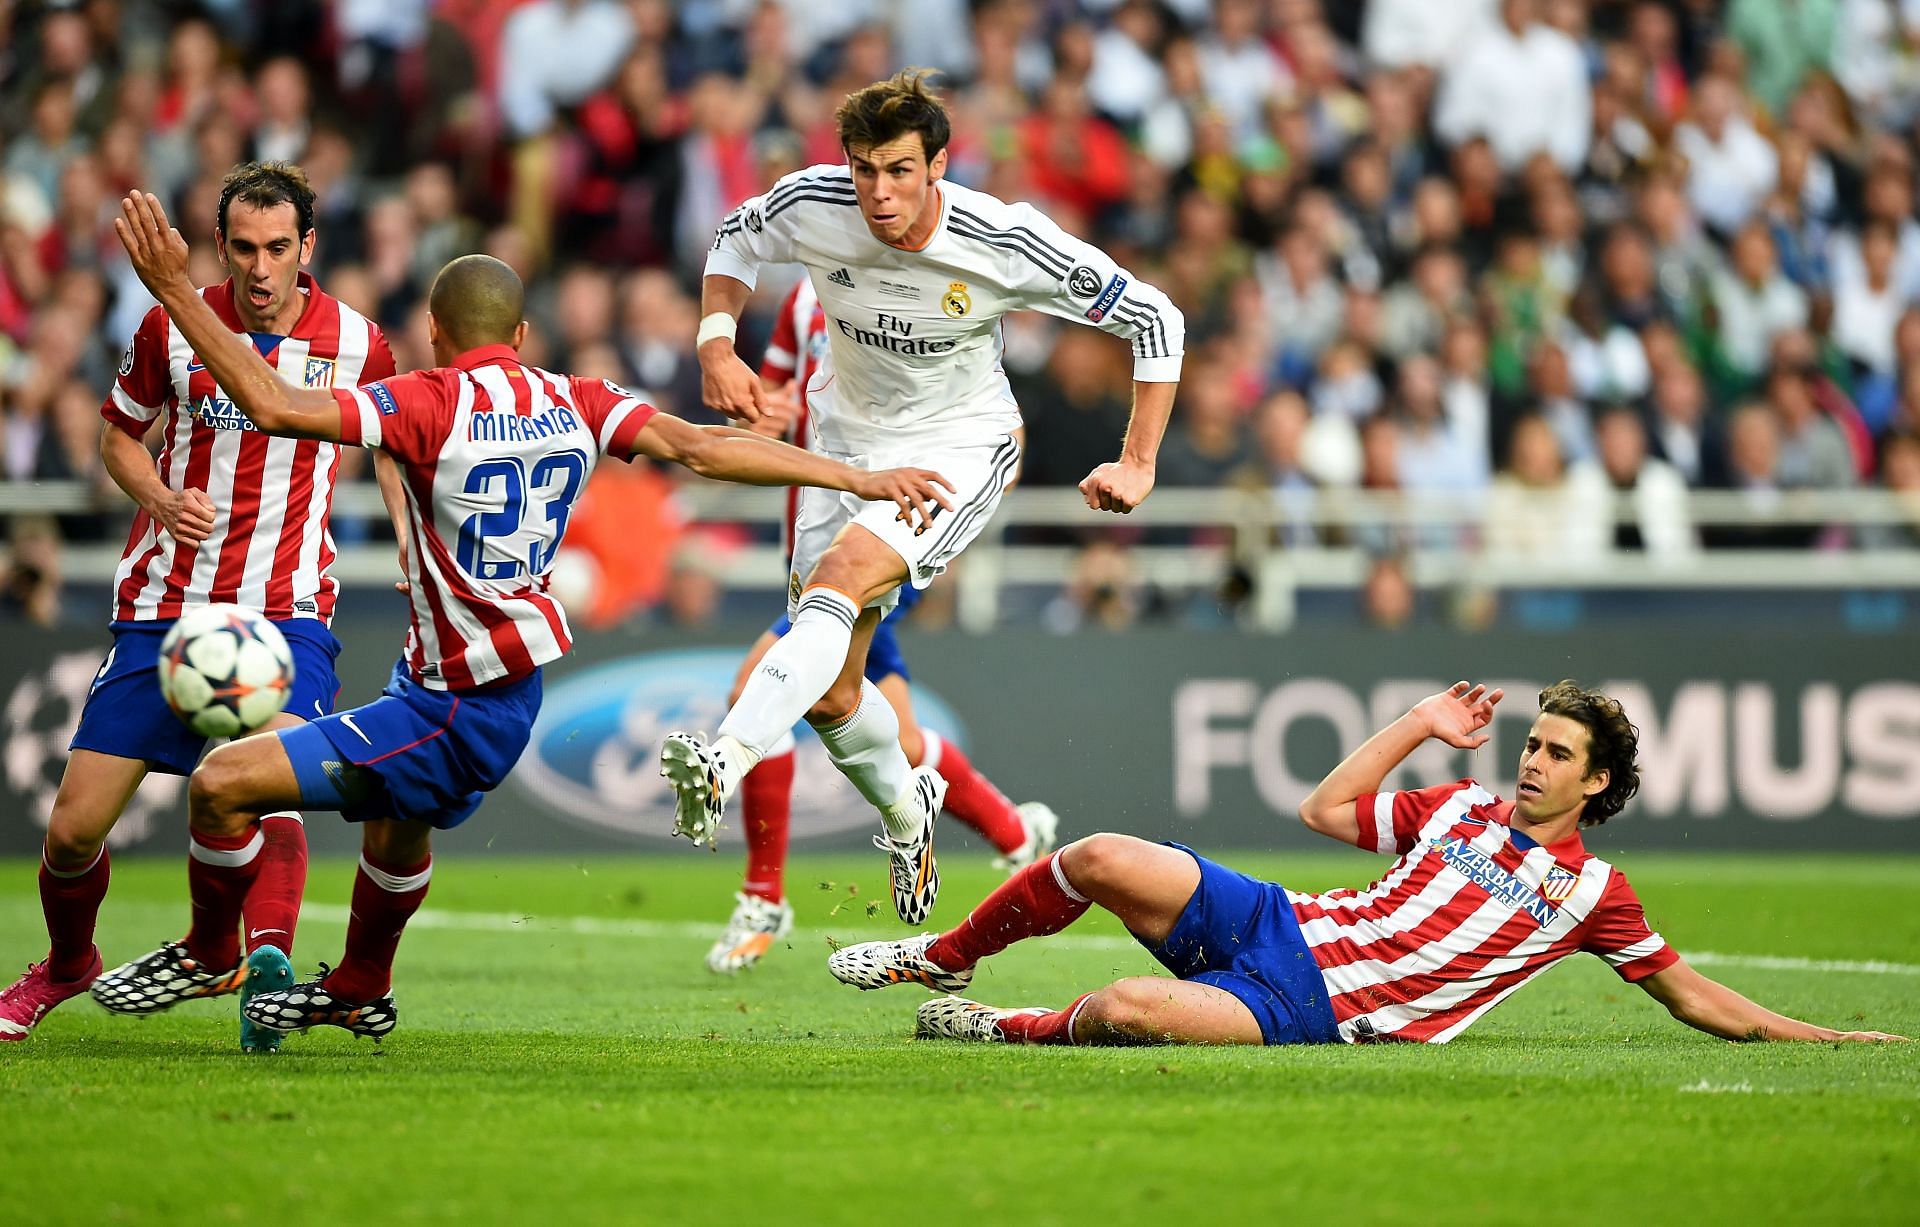 Gareth Bale effectively sealed victory for Real Madrid in the 2014 UEFA Champions League final